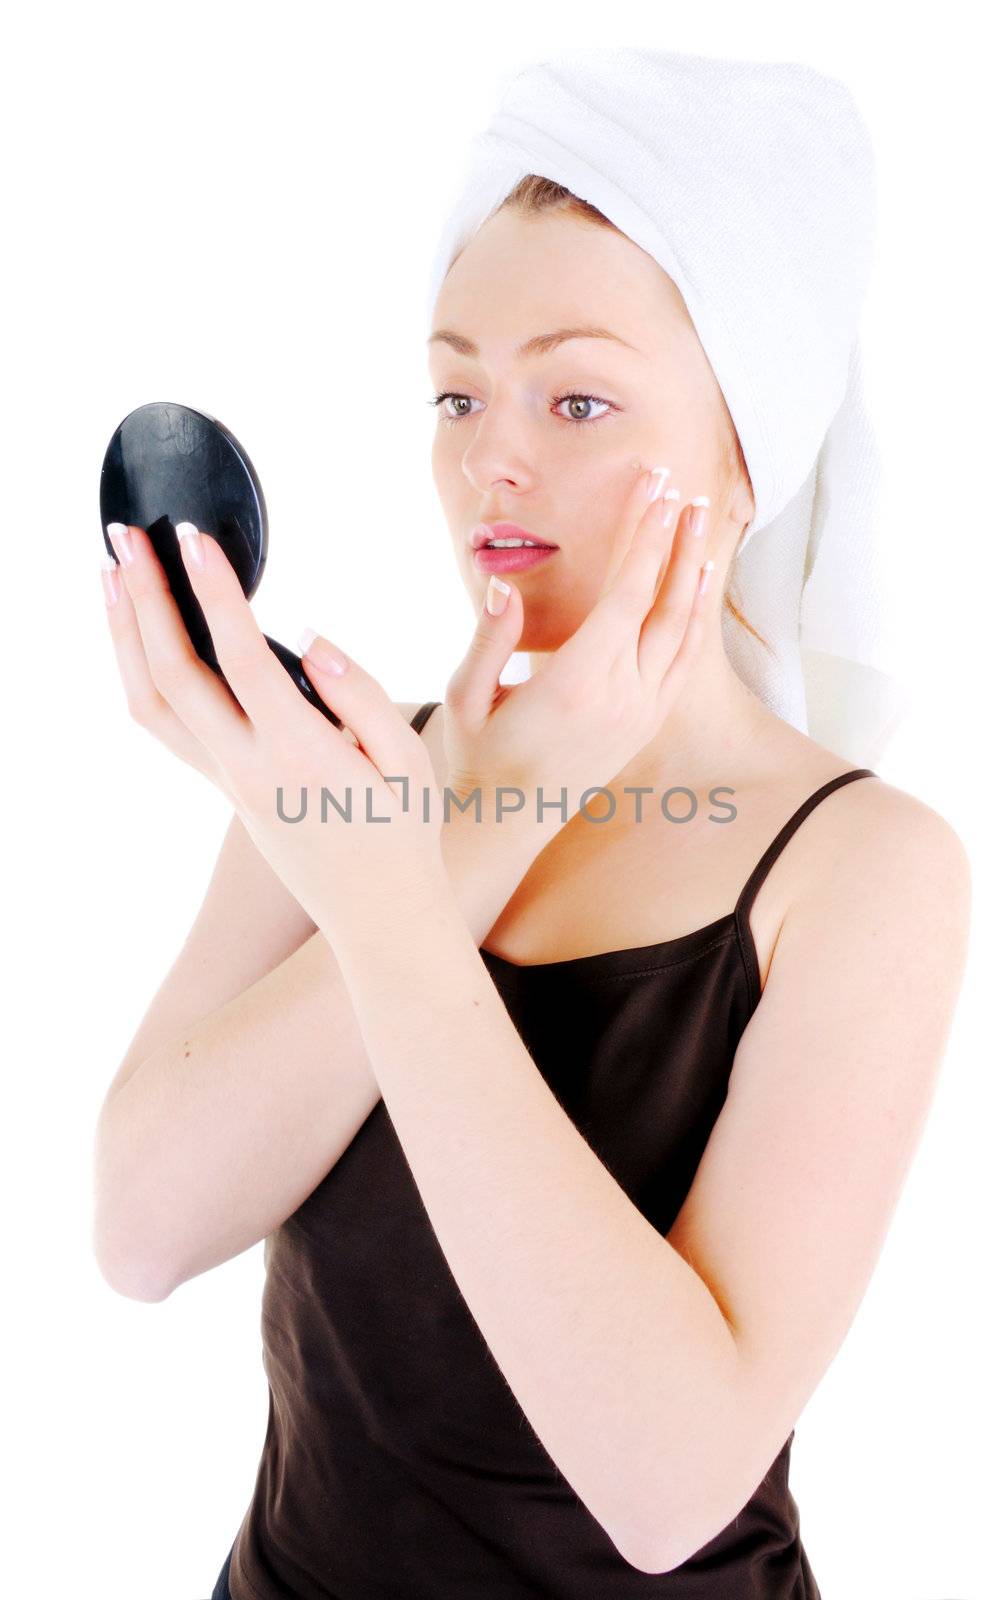 Young woman with white tower and nice manicure is appling cream on her face and looking in the looking glass, on white background